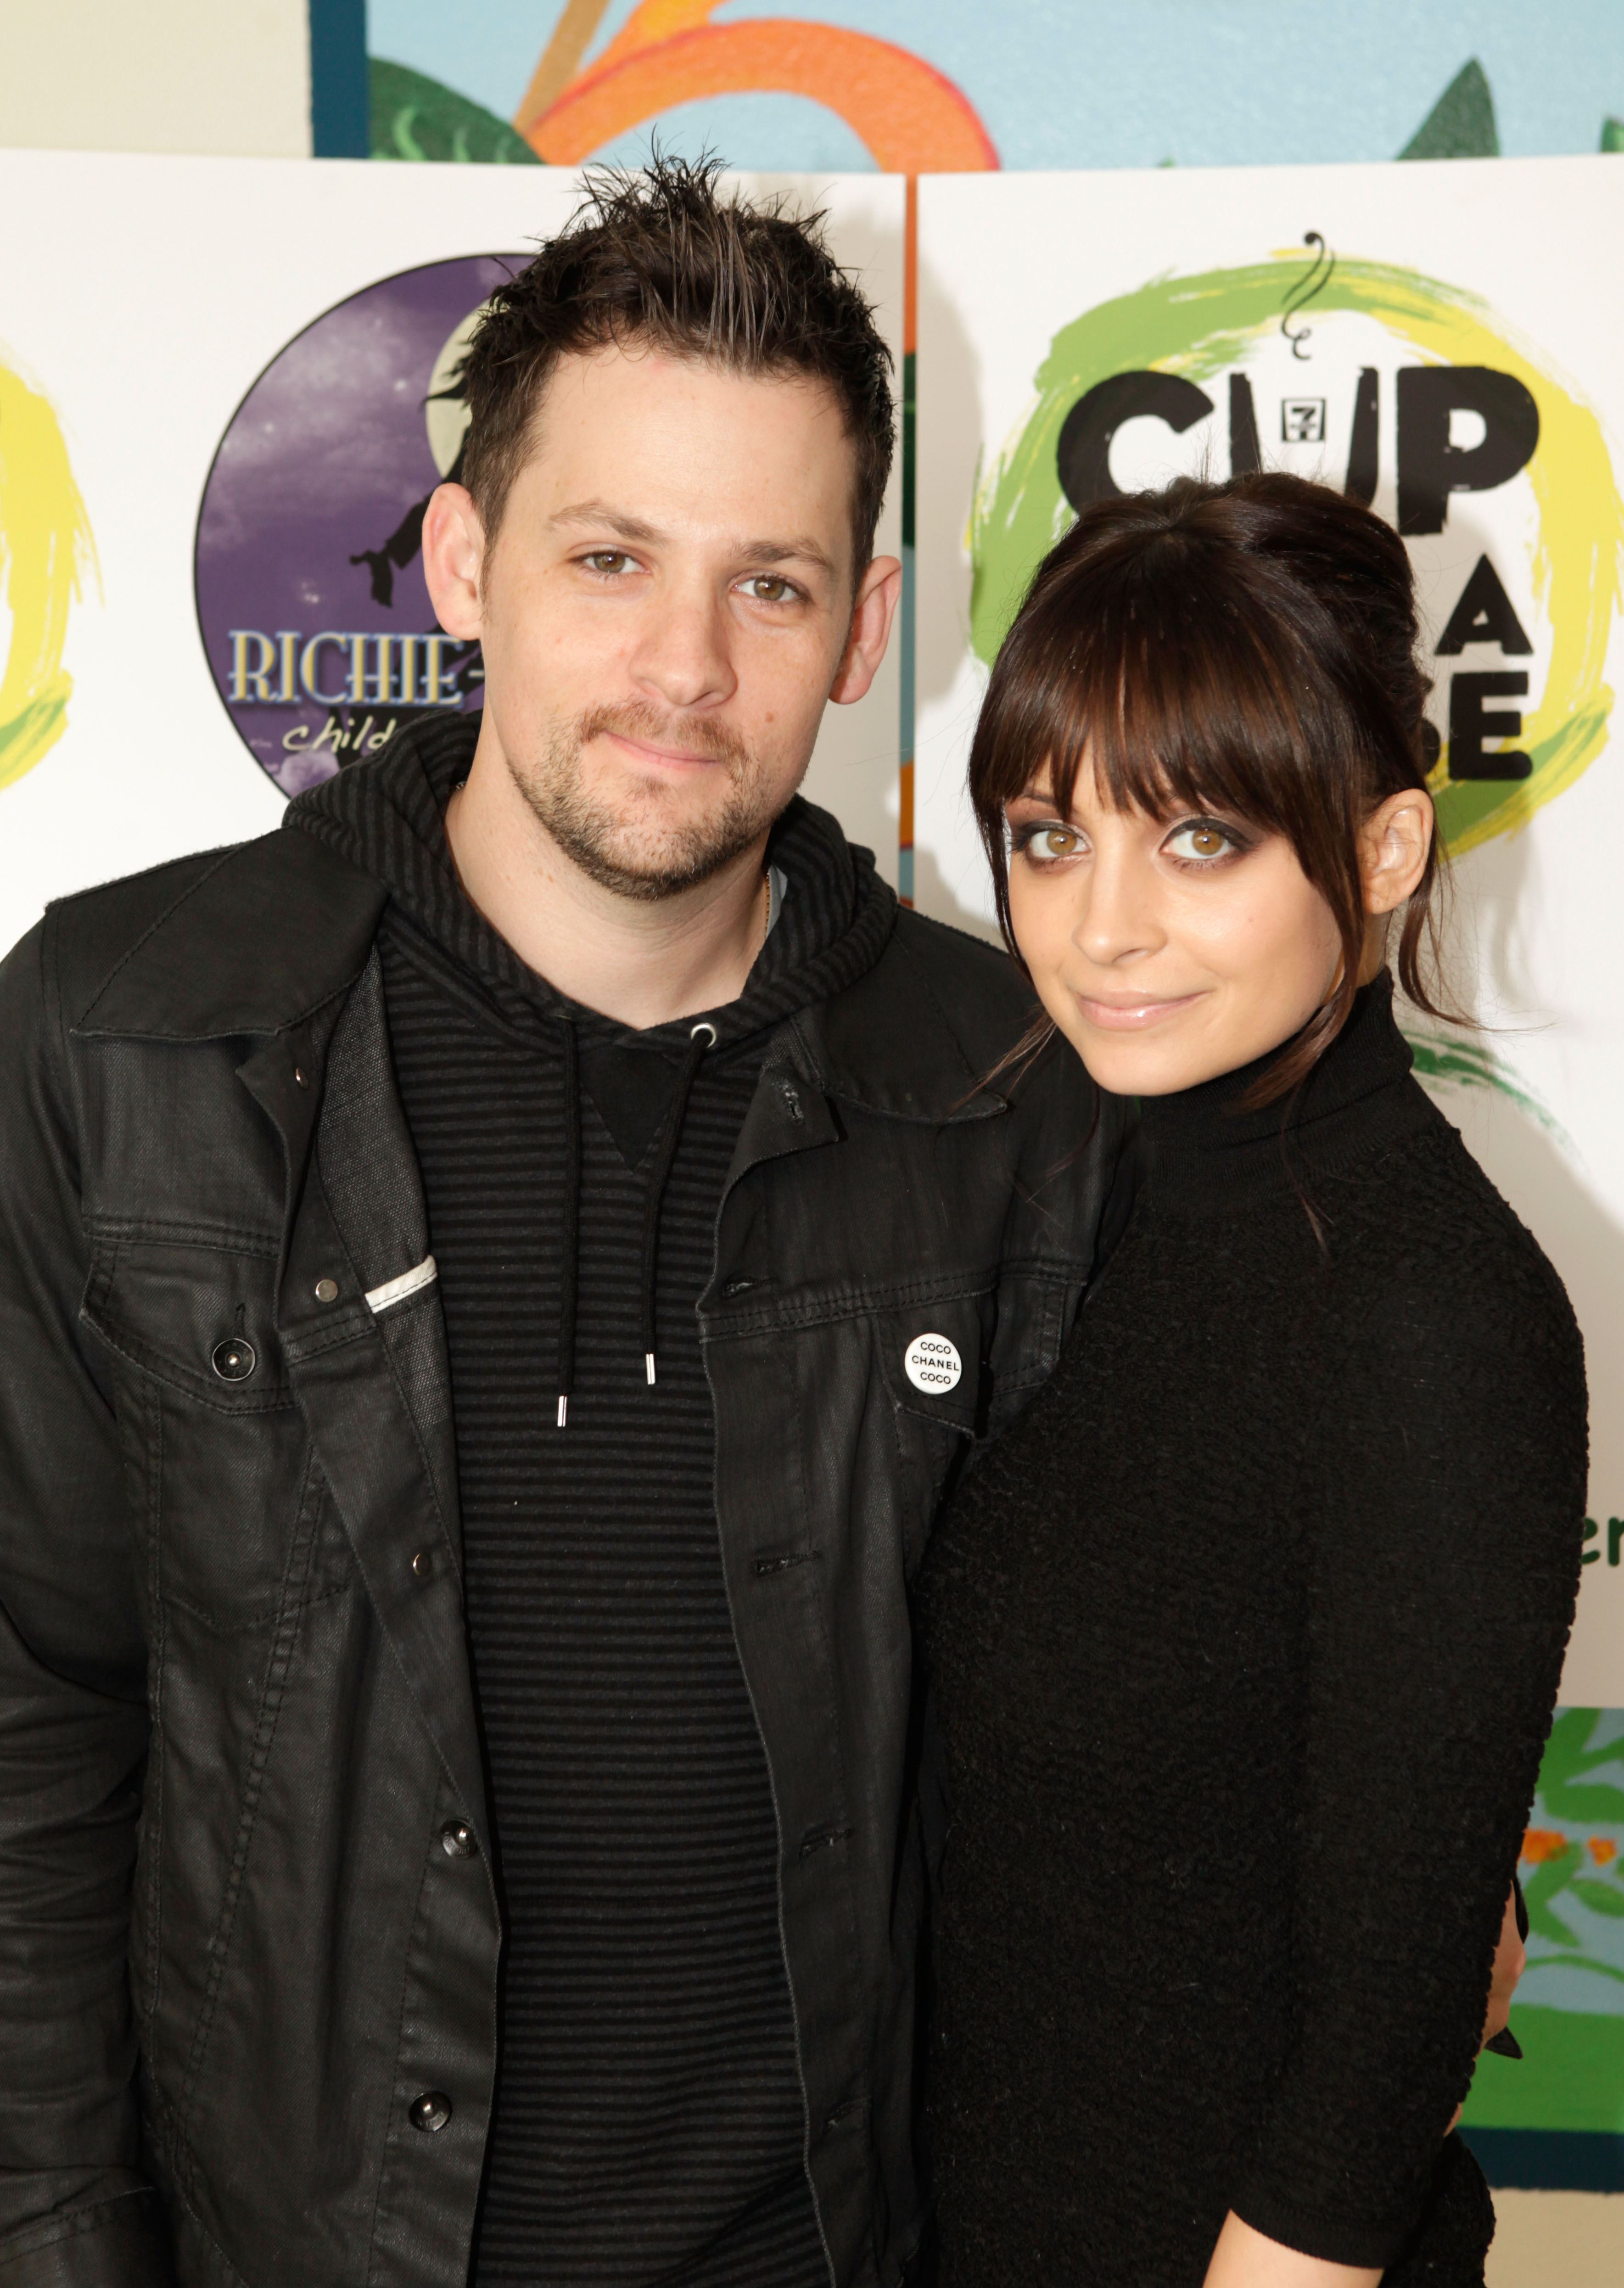 Two people posing for the camera, both dressed in dark casual attire, standing against a backdrop with logos